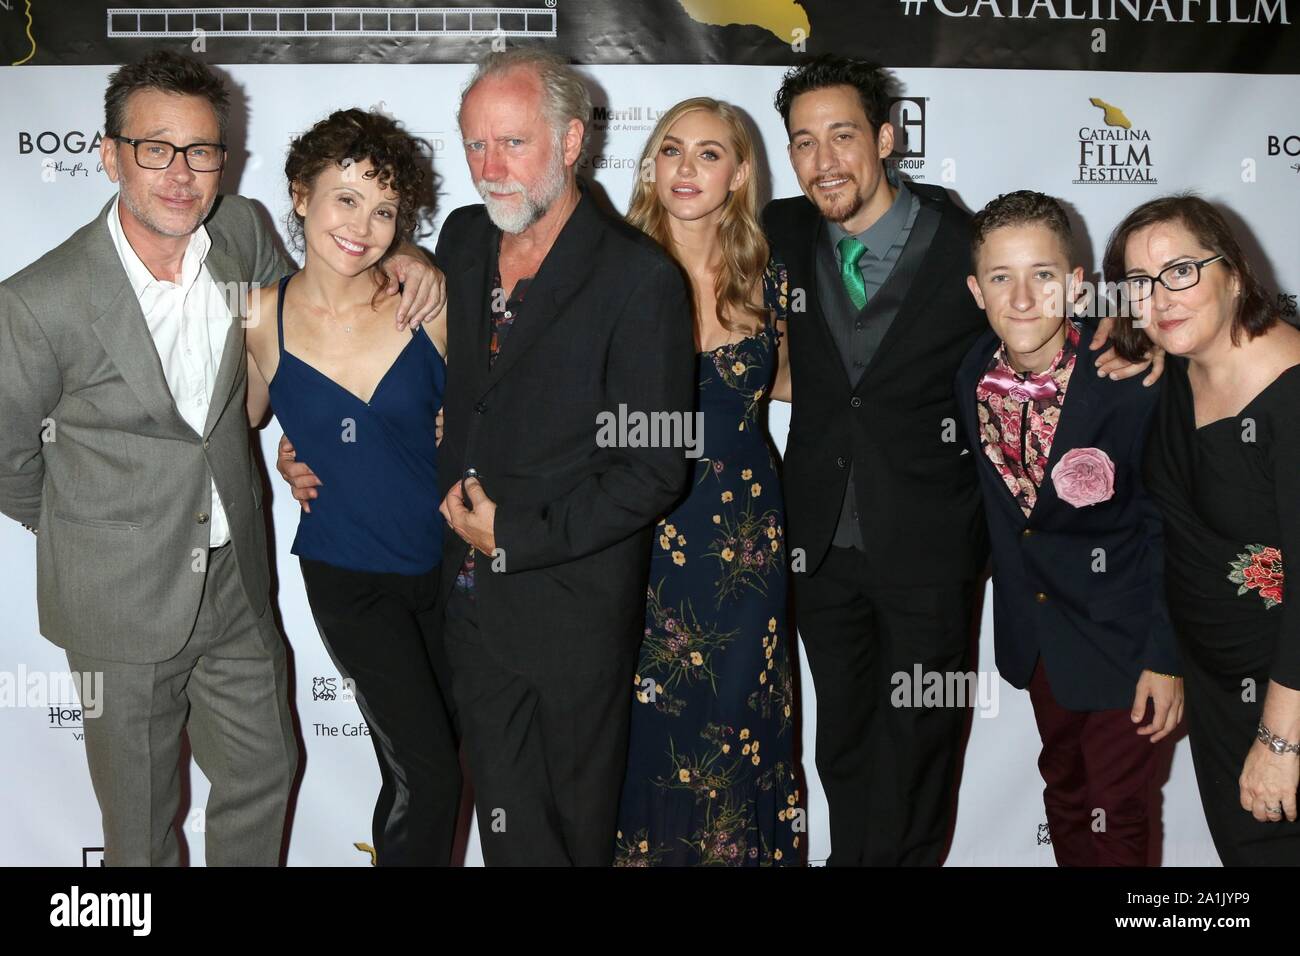 Long Beach, CA. 26th Sep, 2019. Connor Trinneer, Reiko Aylesworth, Xander Berkeley, Jessica Sipos, Sterling Hurst, Nickolas Wolf, Jillian Armenante at arrivals for Catalina Film Festival - THU, RMS Queen Mary, Long Beach, CA September 26, 2019. Credit: Priscilla Grant/Everett Collection/Alamy Live News Stock Photo